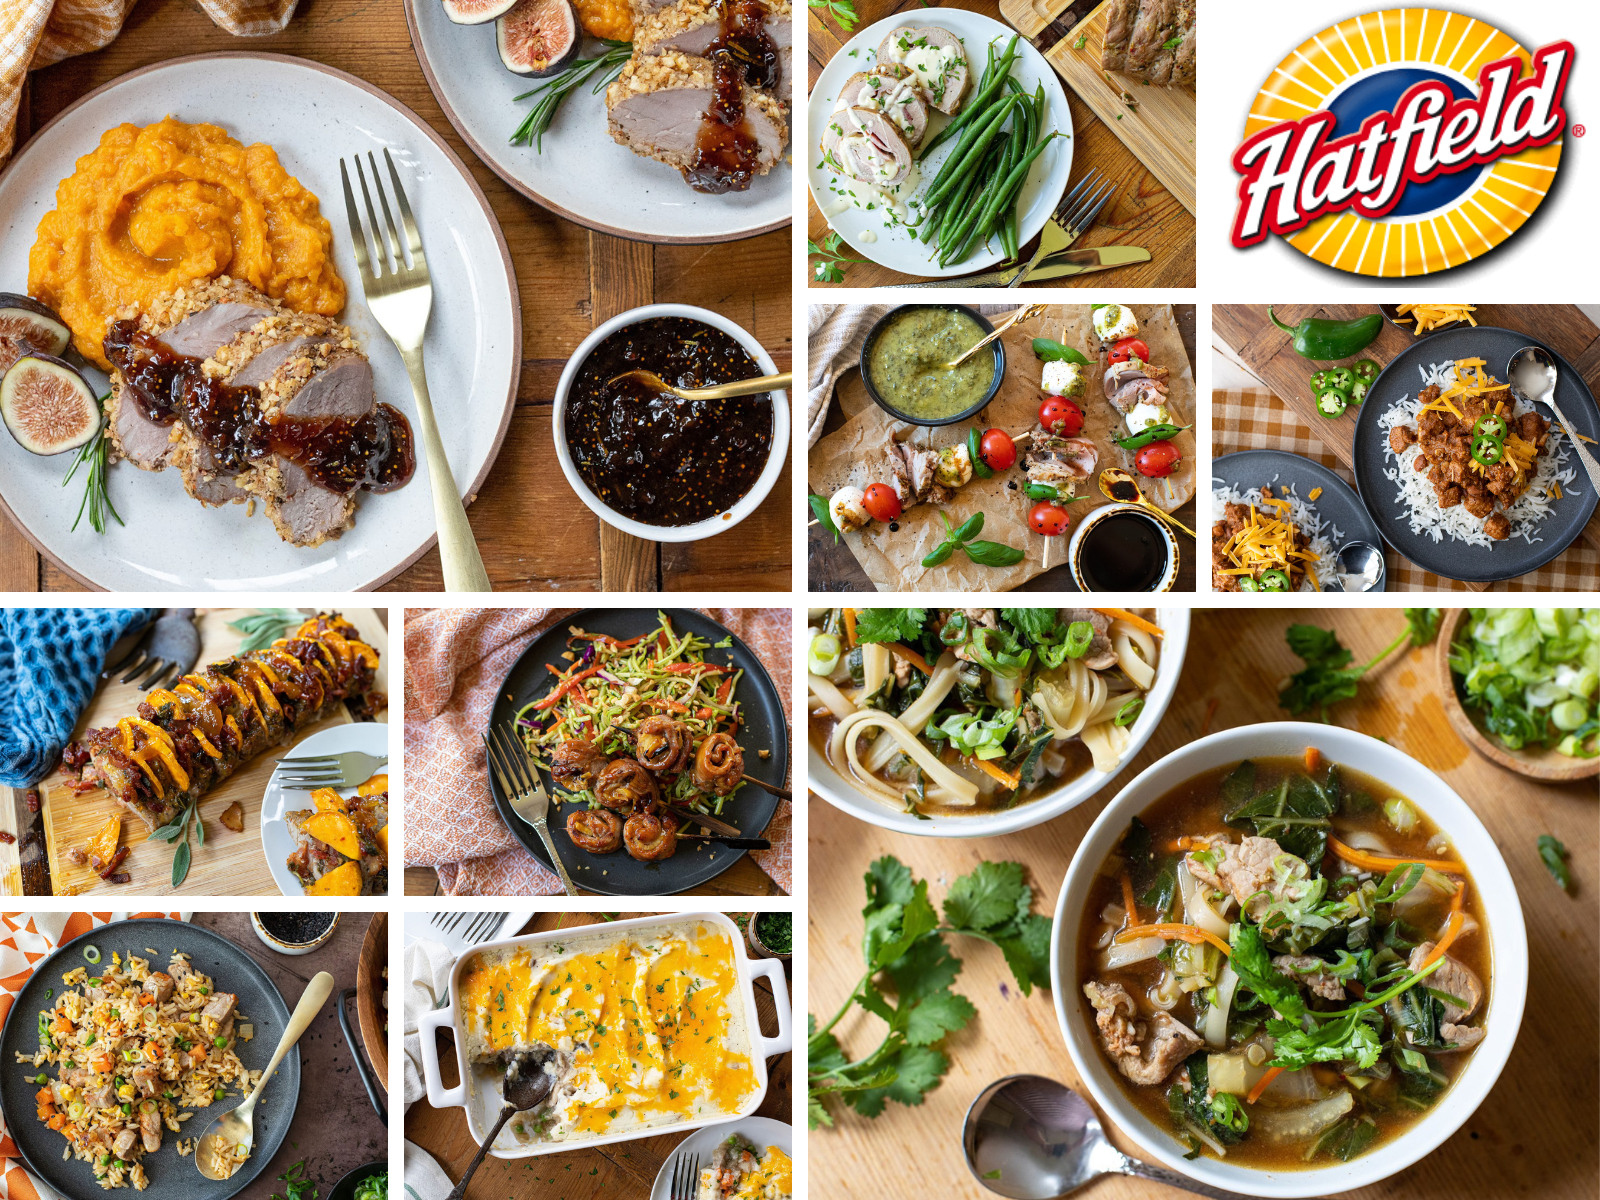 Hatfield Makes Holiday Meals Quick & Easy – Enter To Win A $50 Publix Gift Card